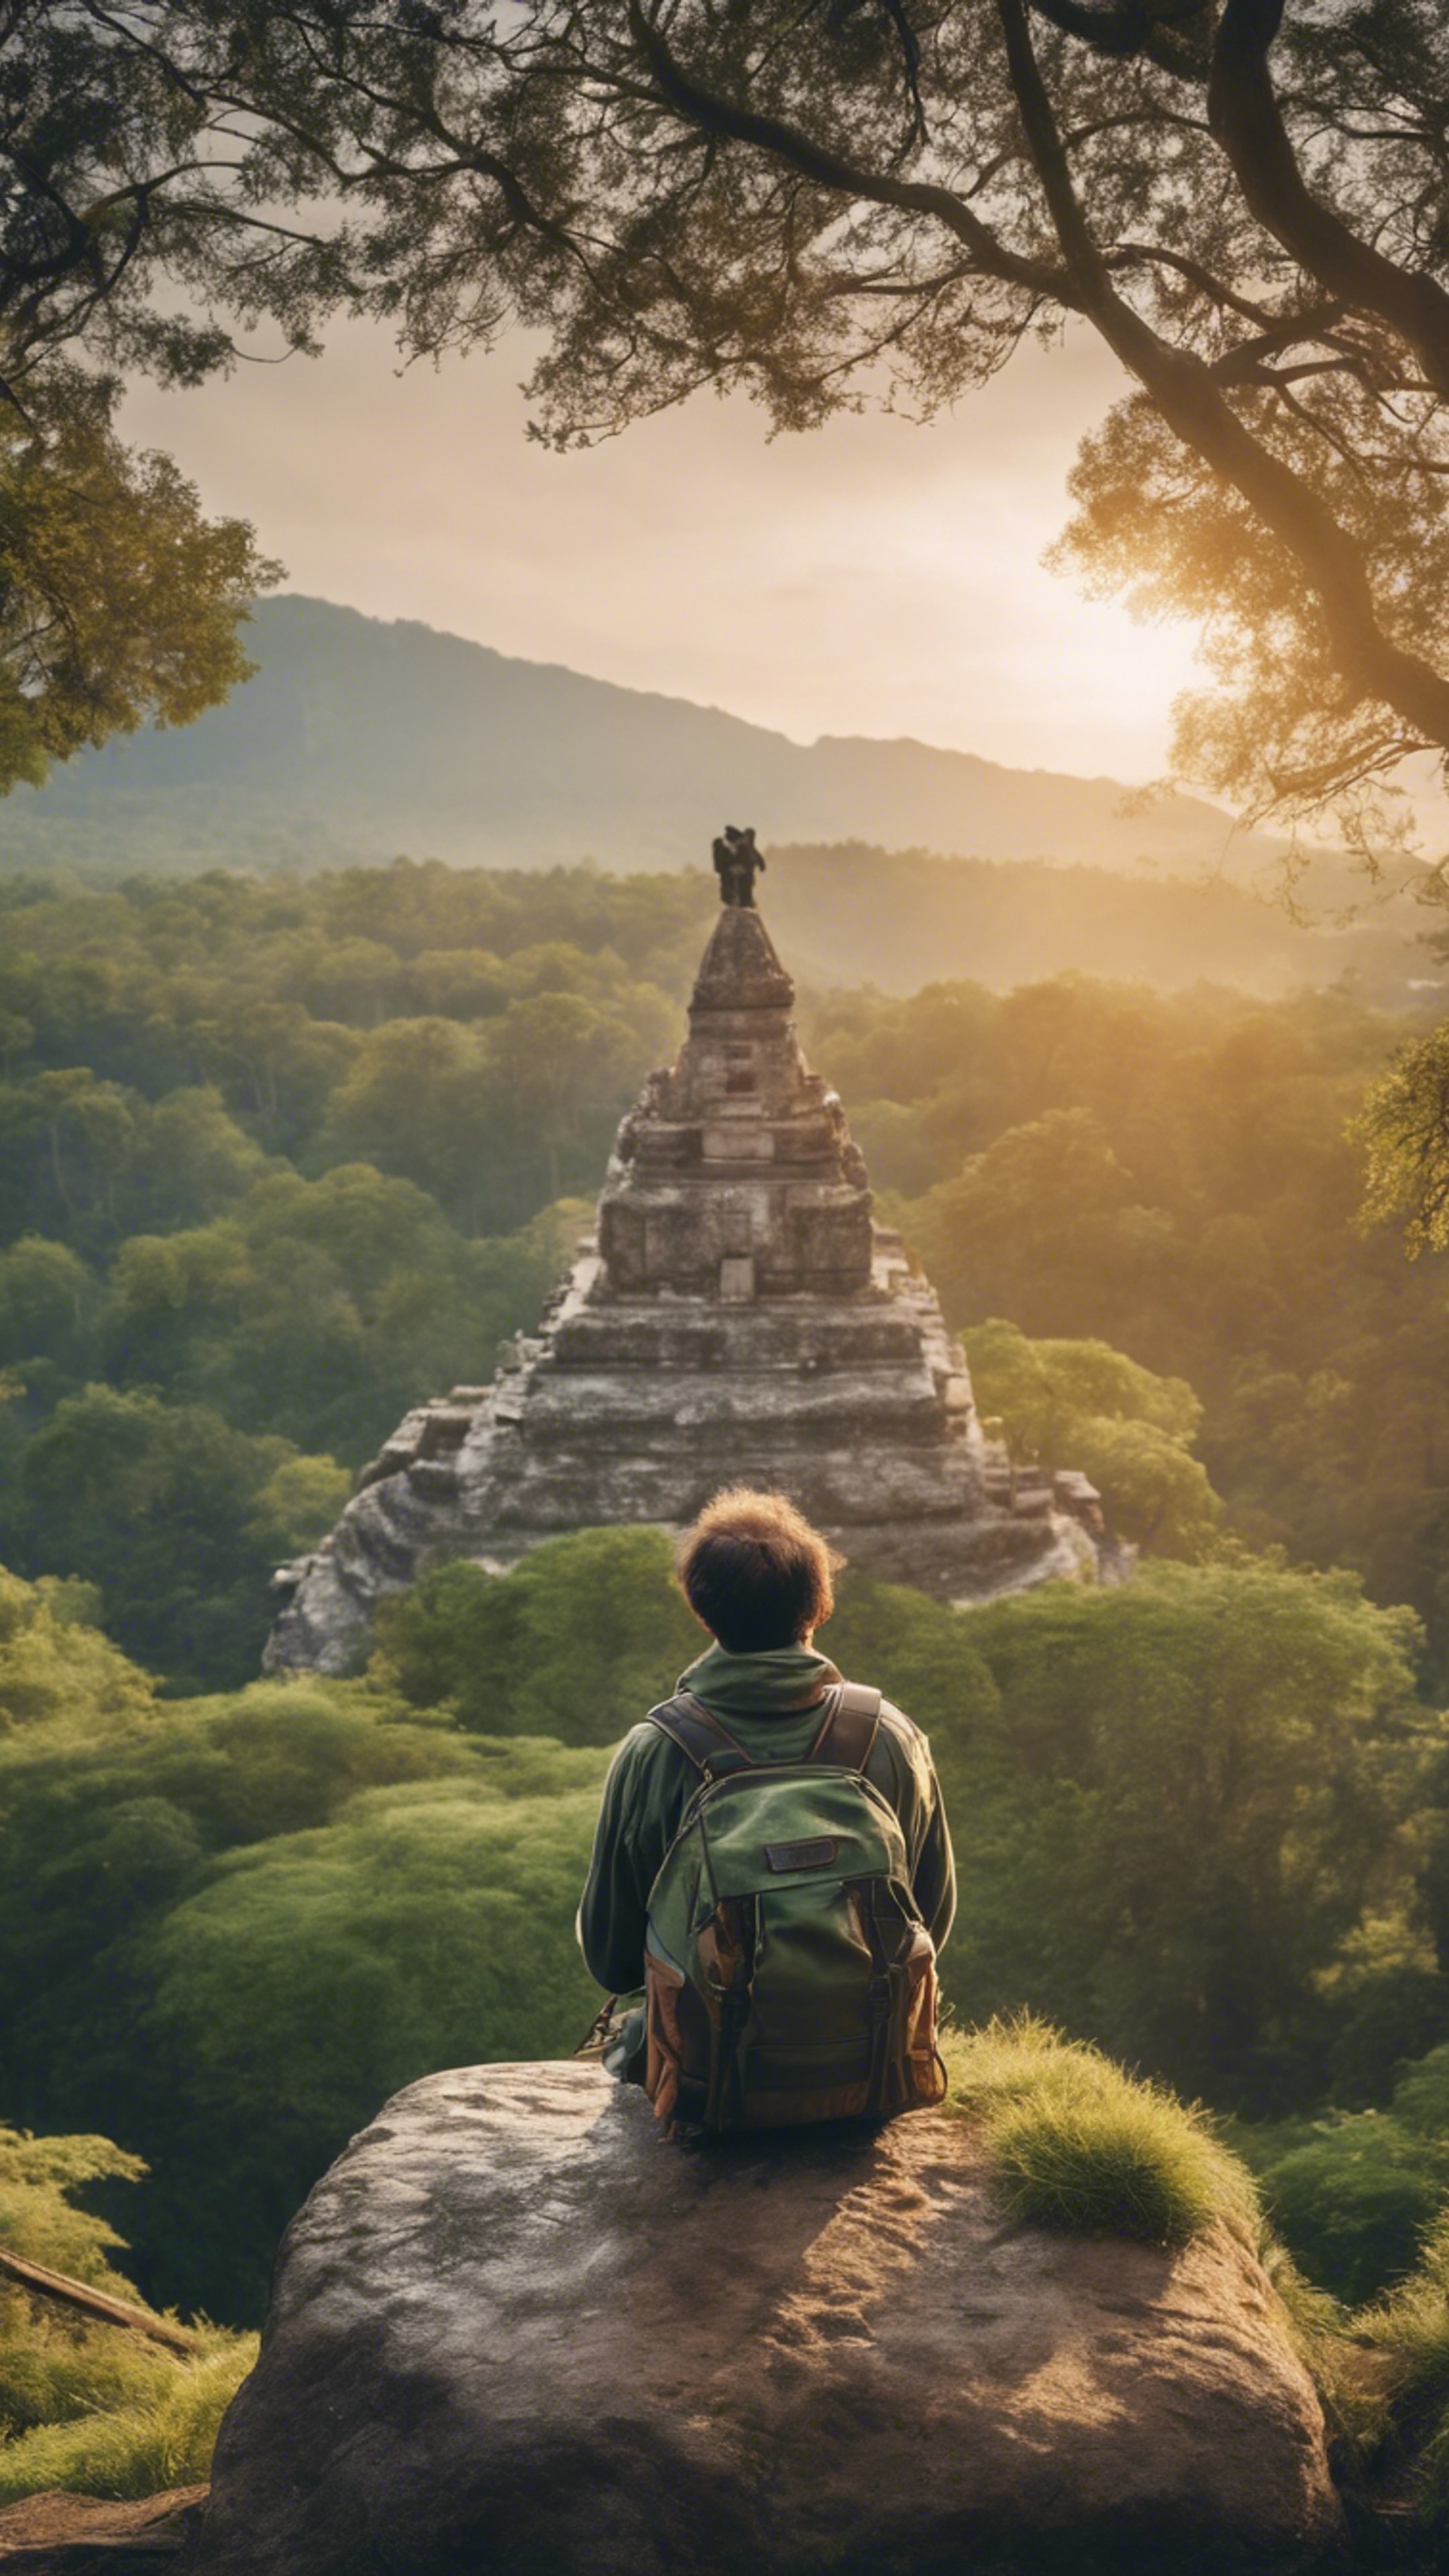 A traveller man with a worn-out backpack watching the sunrise on top of a moss-covered ancient temple. Wallpaper[8afcea9d9a514f8e9121]